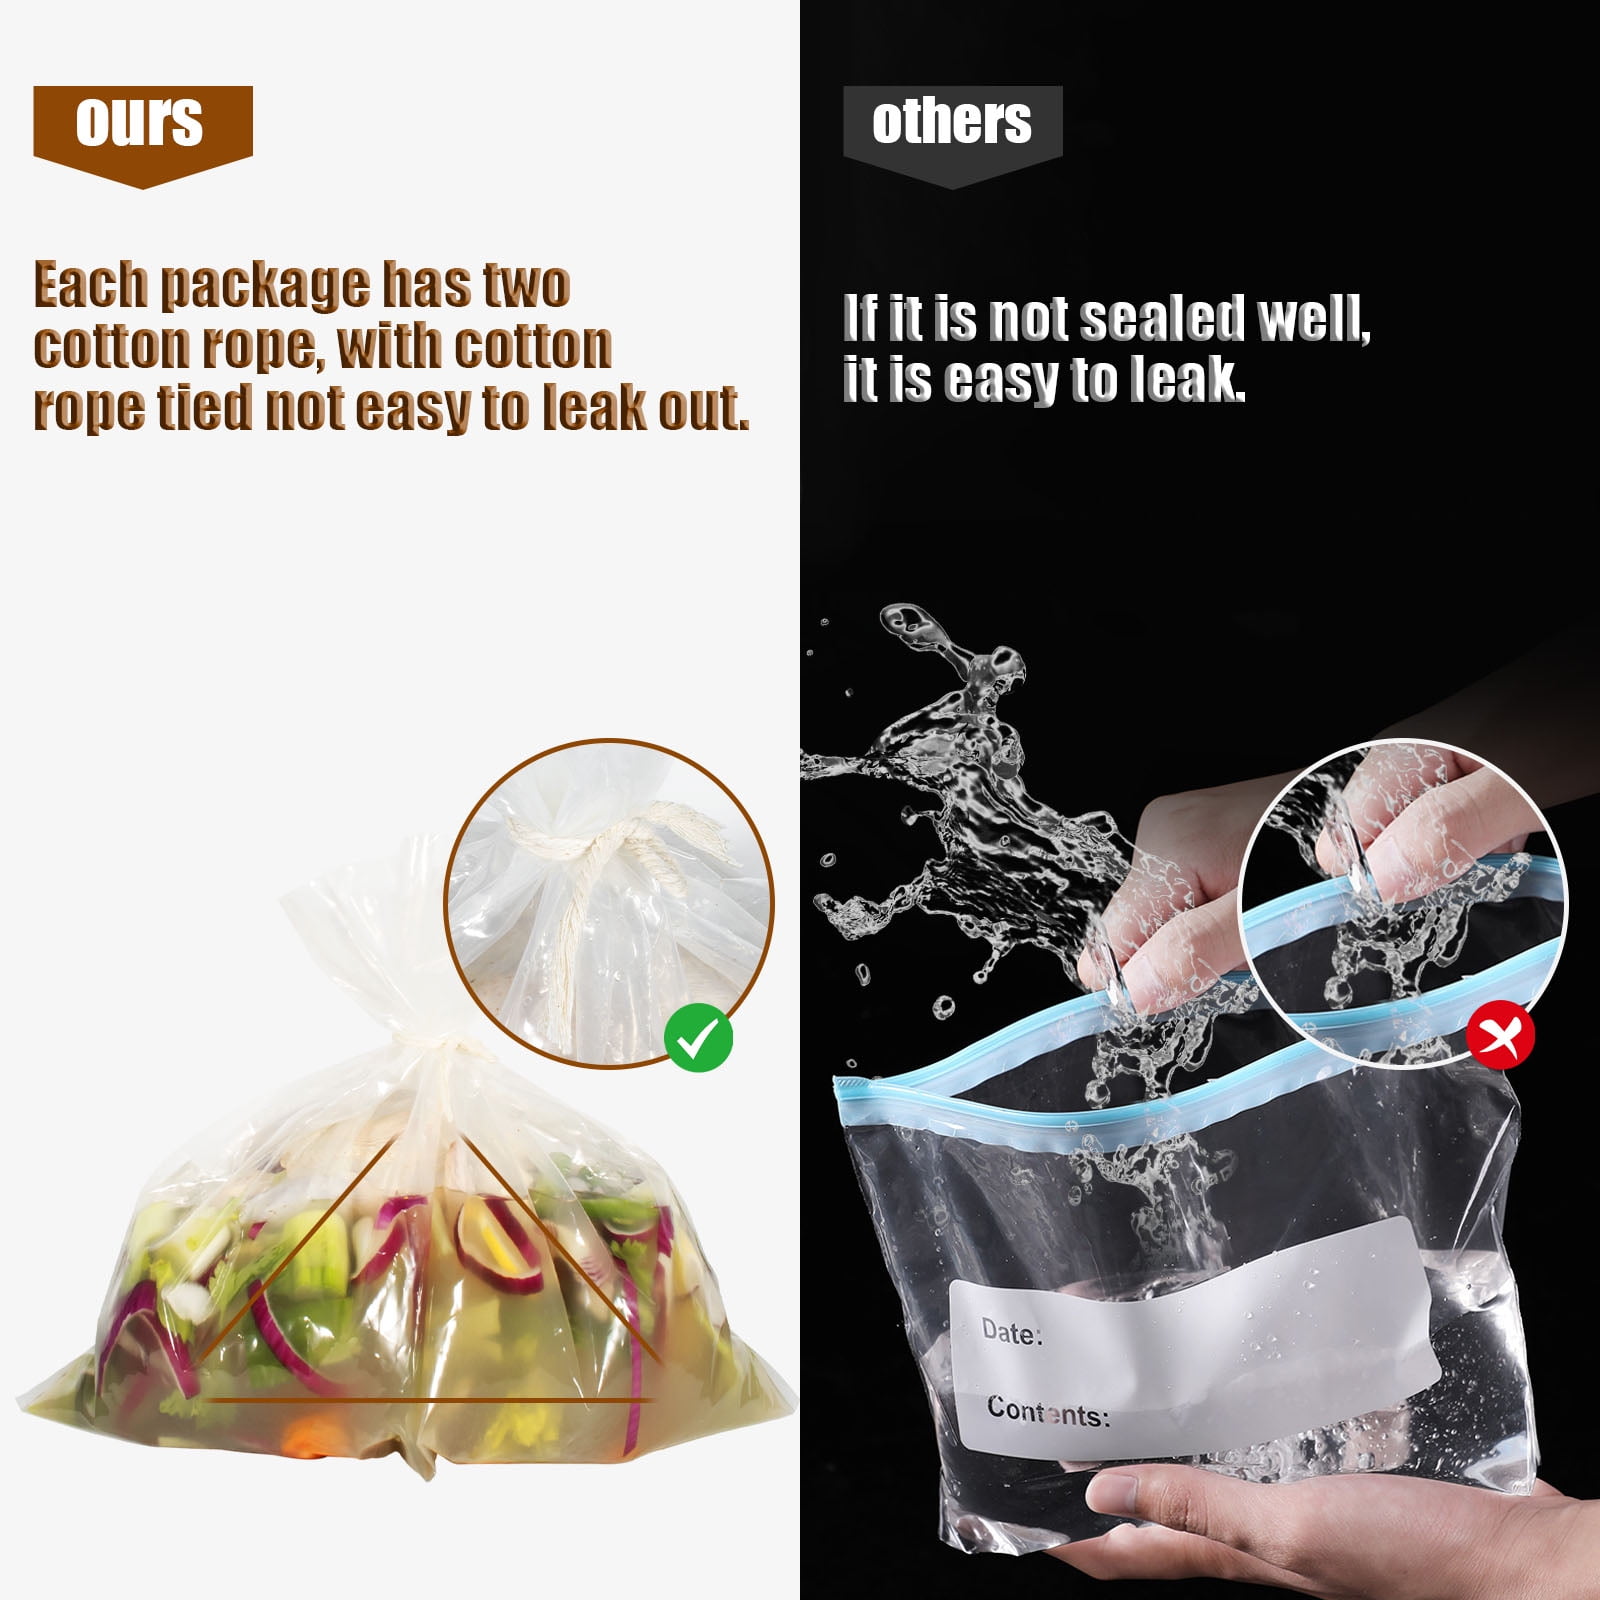 [10 Count] Jumbo Storage Bags with Carry Handles - Perfect Resealable Brining Bag for Huge Turkey Roast Extra Large Size 24 x 24 - Clear Heavy Duty